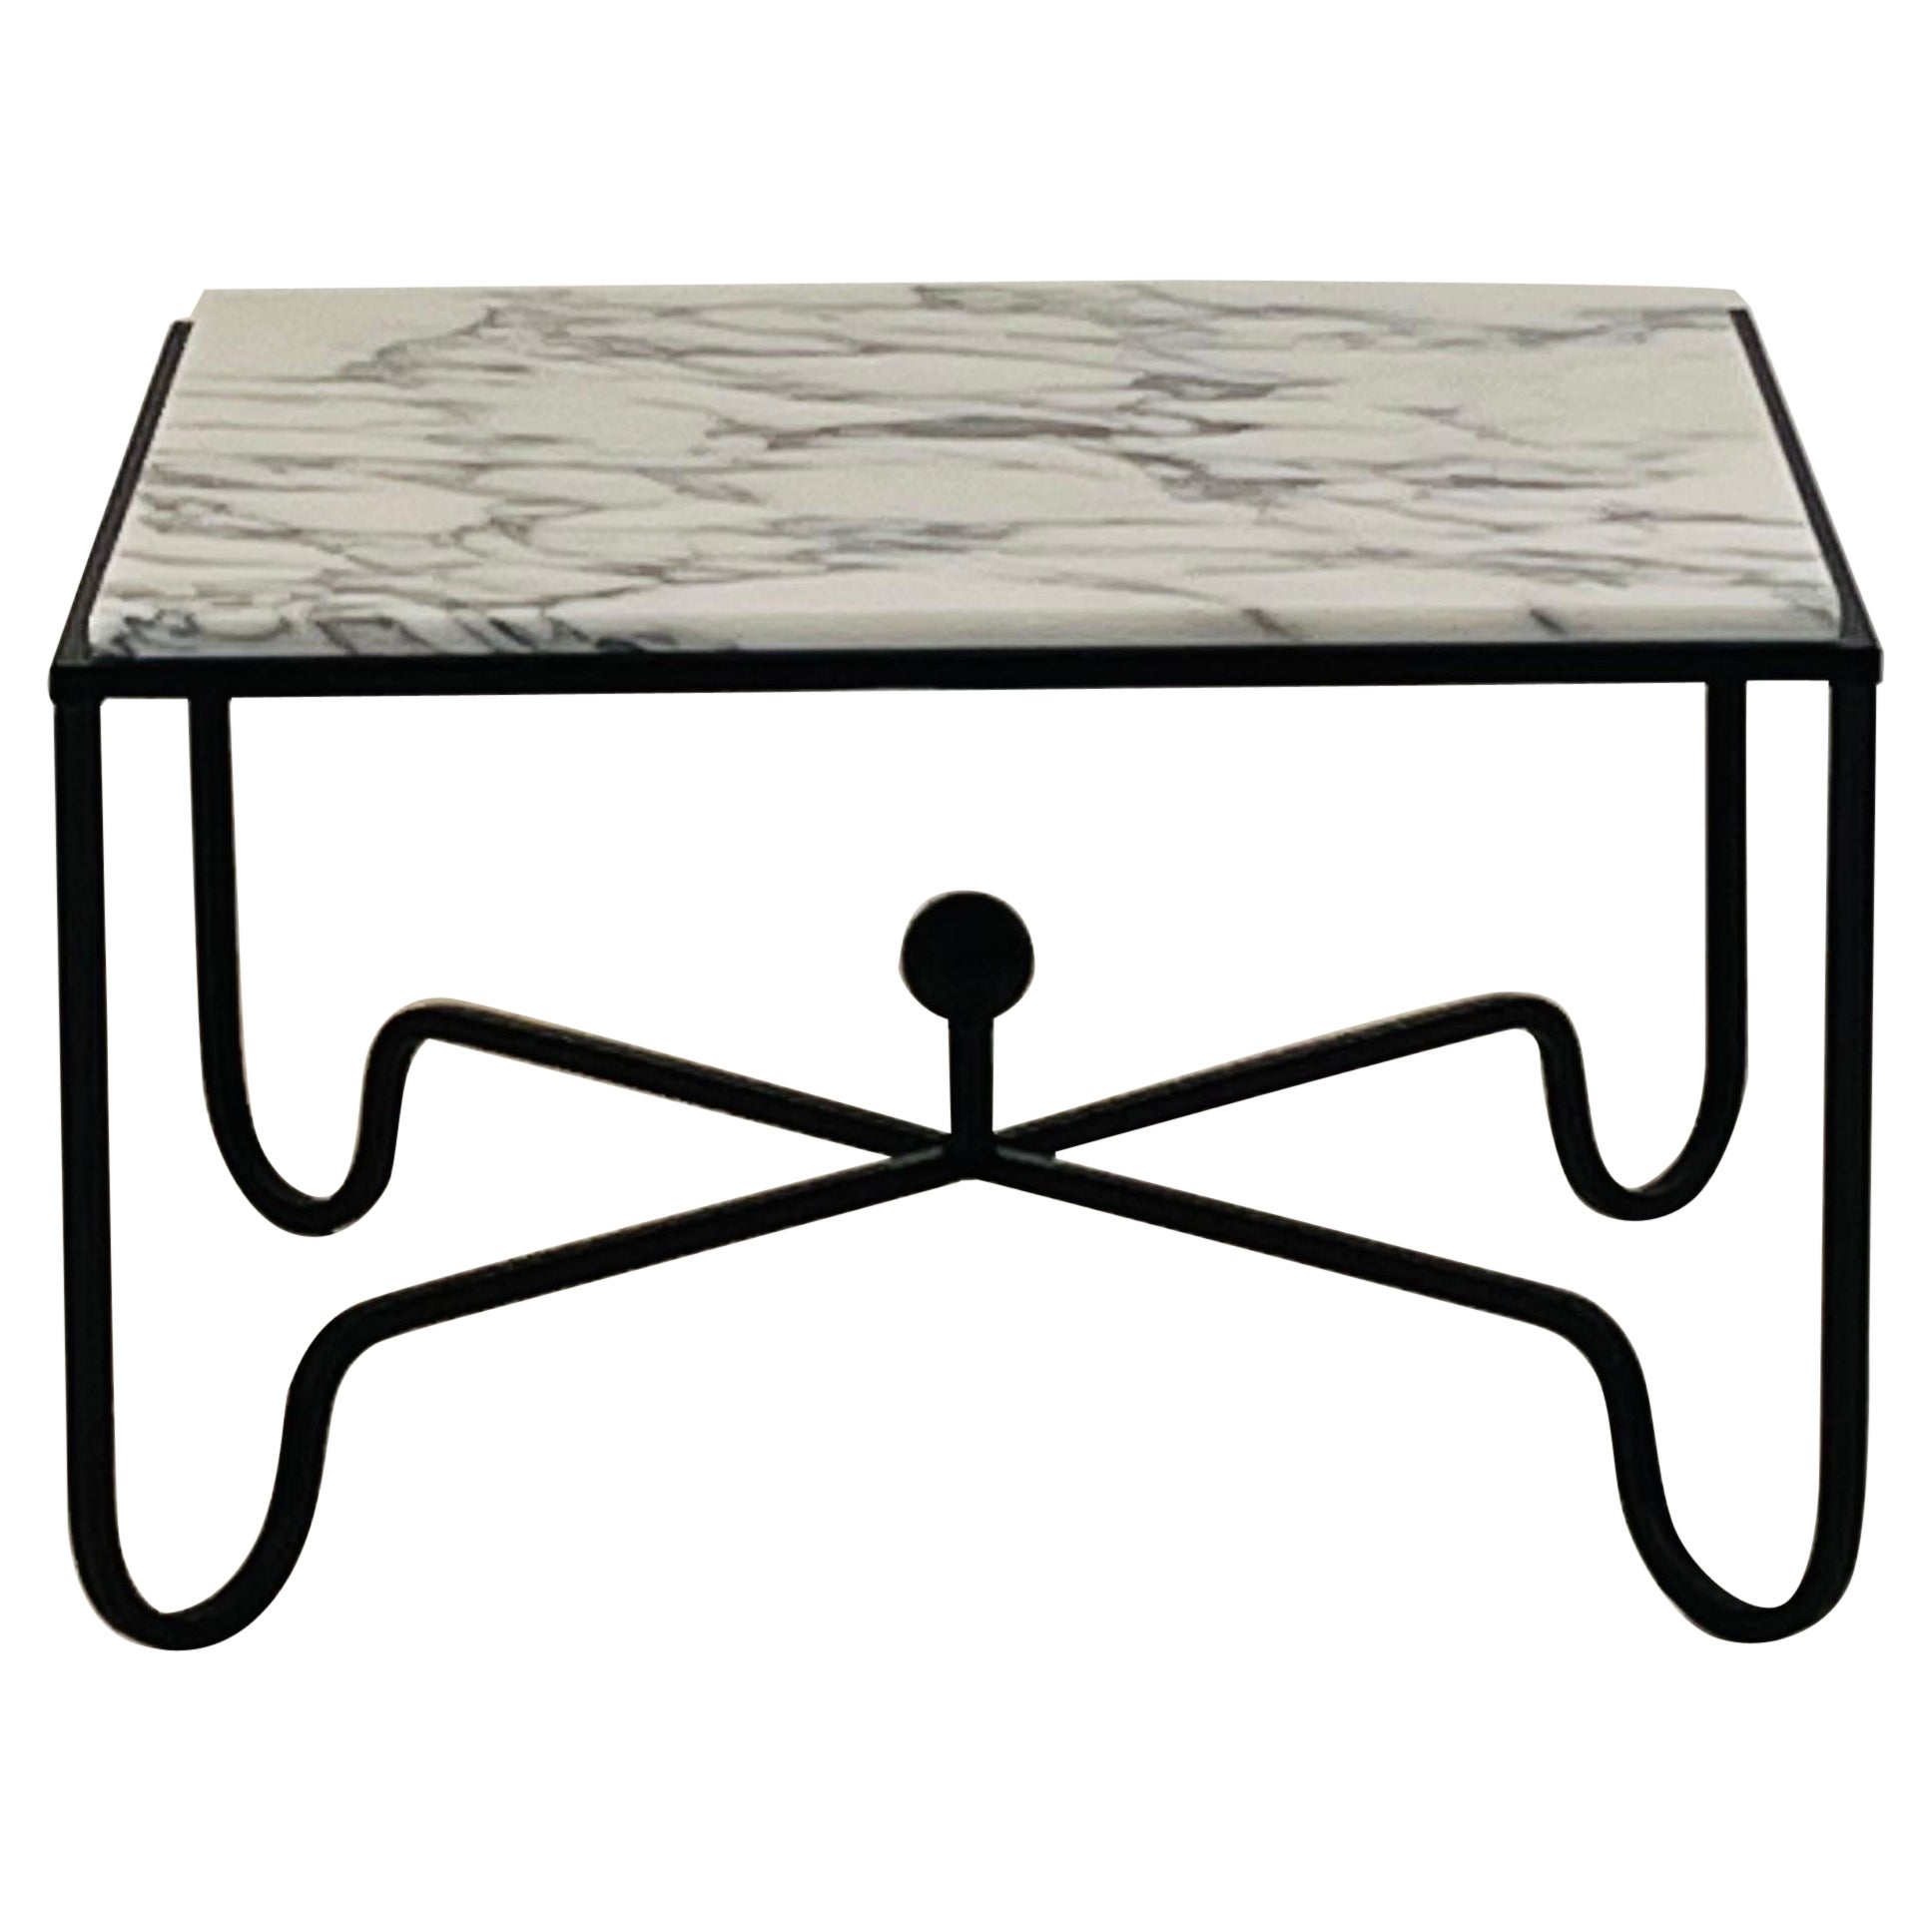 Chic Arabescato Marble 'Entretoise' Side or End Table by Design Frères